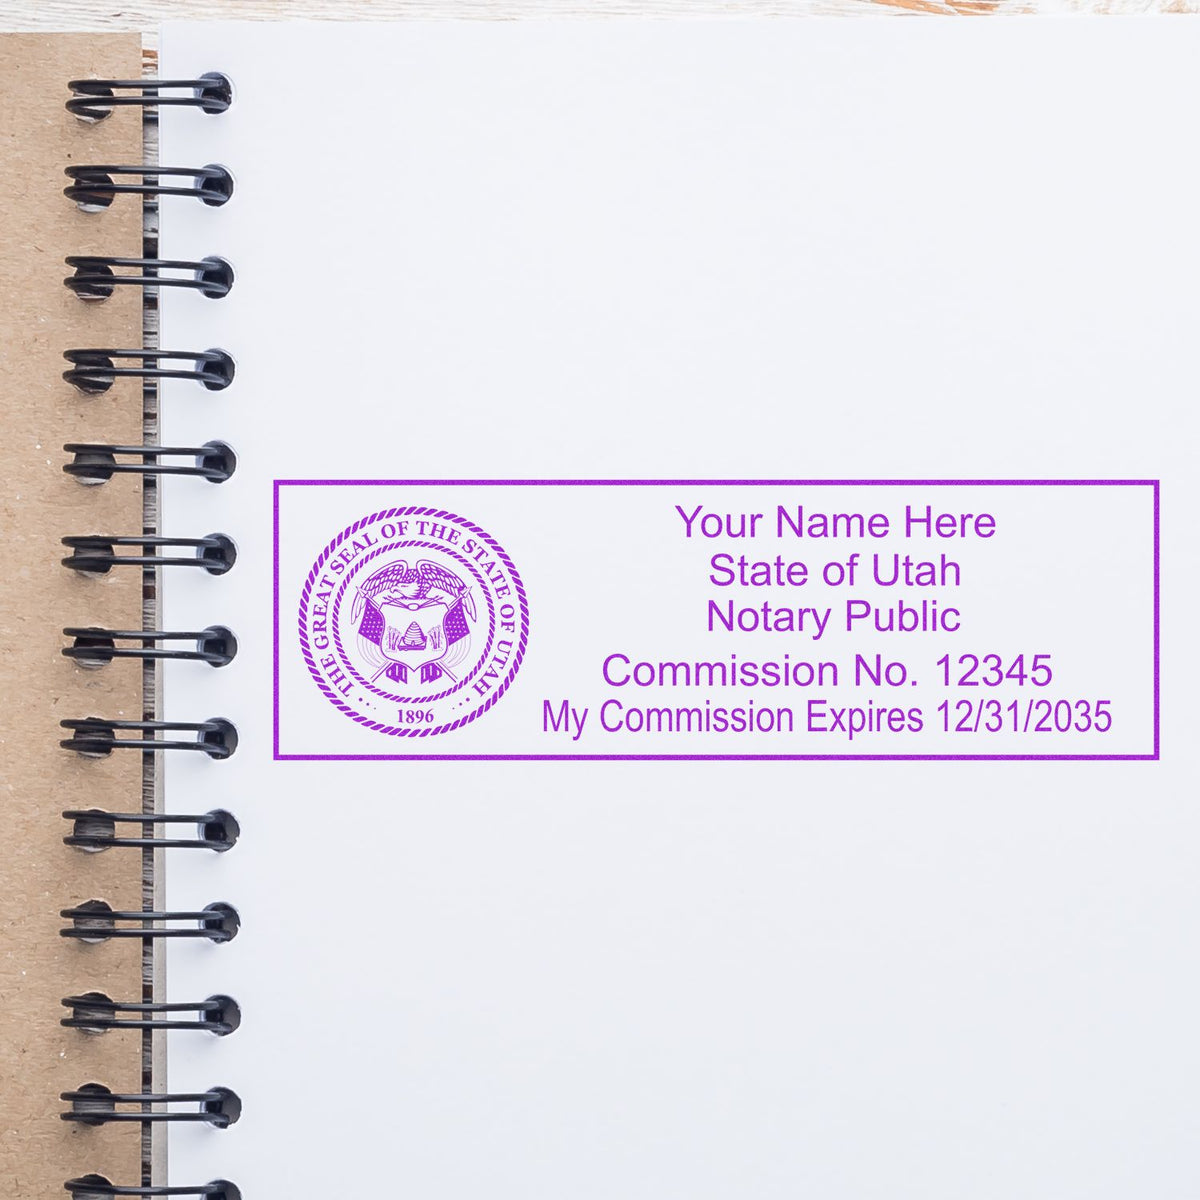 A photograph of the Heavy-Duty Utah Rectangular Notary Stamp stamp impression reveals a vivid, professional image of the on paper.